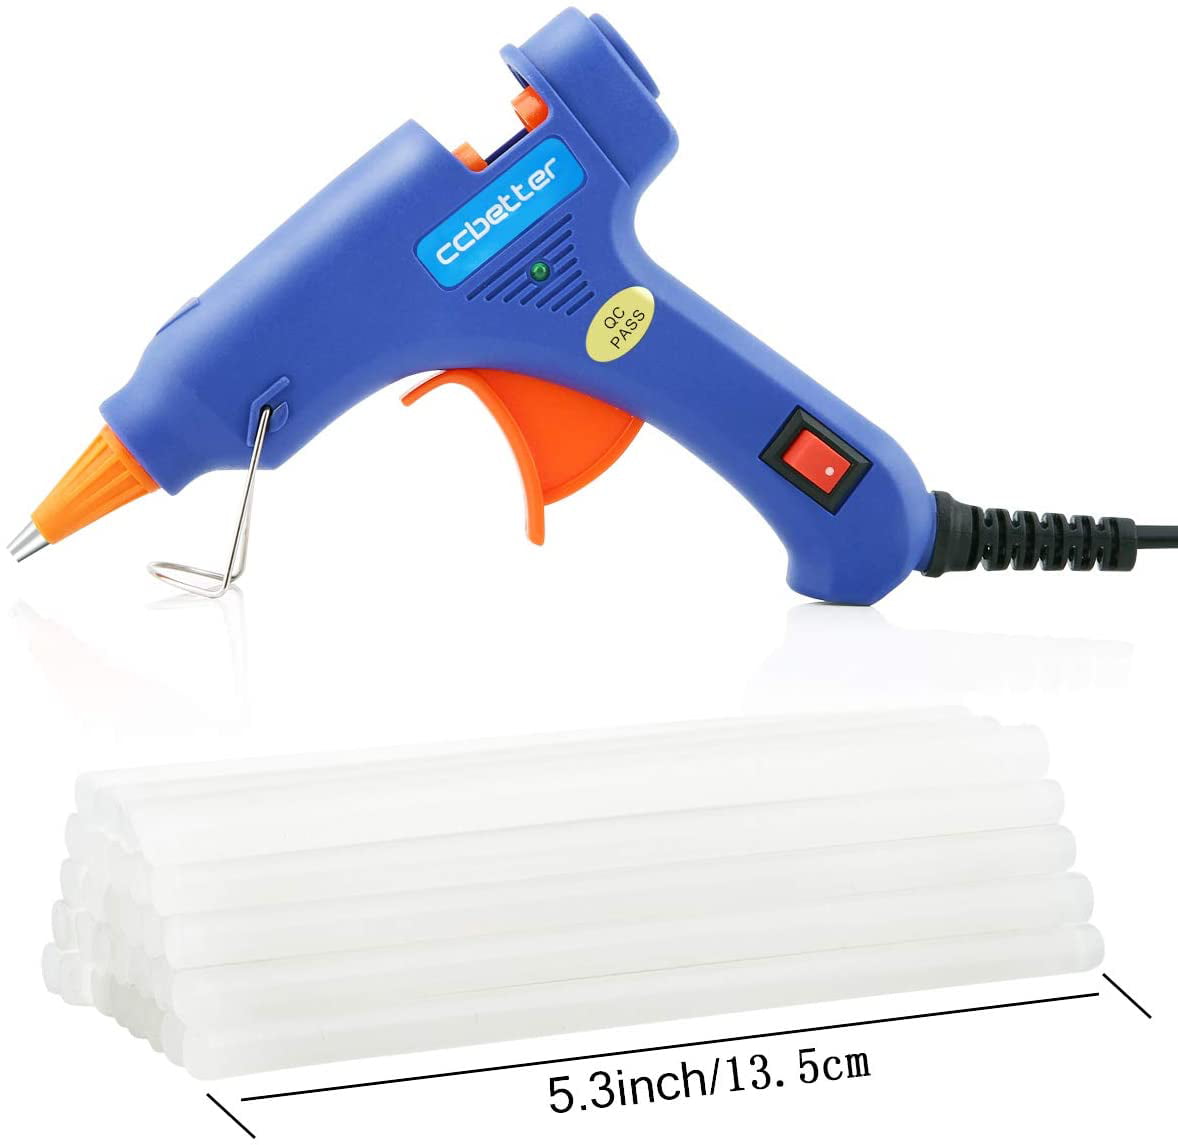 Glue Guns ccbetter Upgraded Mini Hot Melt Glue Gun with 30pcs Glue Sticks,Removable  Anti-hot Cover Glue Gun Kit with Flexible Trigger for DIY Small Craft  Projects & Sealing and Quick Daily Repairs 20-watt,Blue -